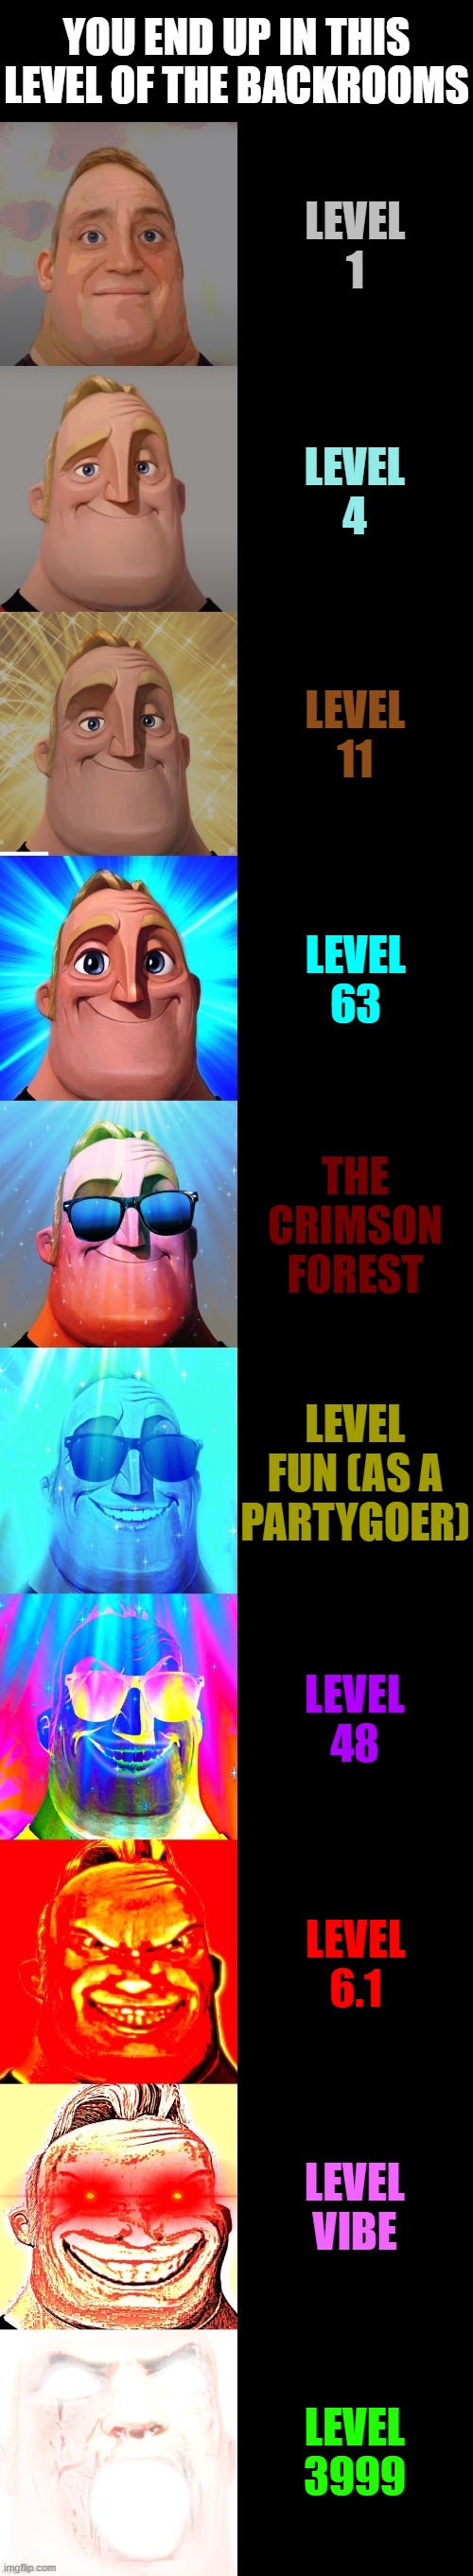 original by ale fabius on yt :/ |  YOU END UP IN THIS LEVEL OF THE BACKROOMS; LEVEL 1; LEVEL 4; LEVEL 11; LEVEL 63; THE CRIMSON FOREST; LEVEL FUN (AS A PARTYGOER); LEVEL 48; LEVEL 6.1; LEVEL VIBE; LEVEL 3999 | image tagged in mr incredible becoming canny,the backrooms,memes | made w/ Imgflip meme maker